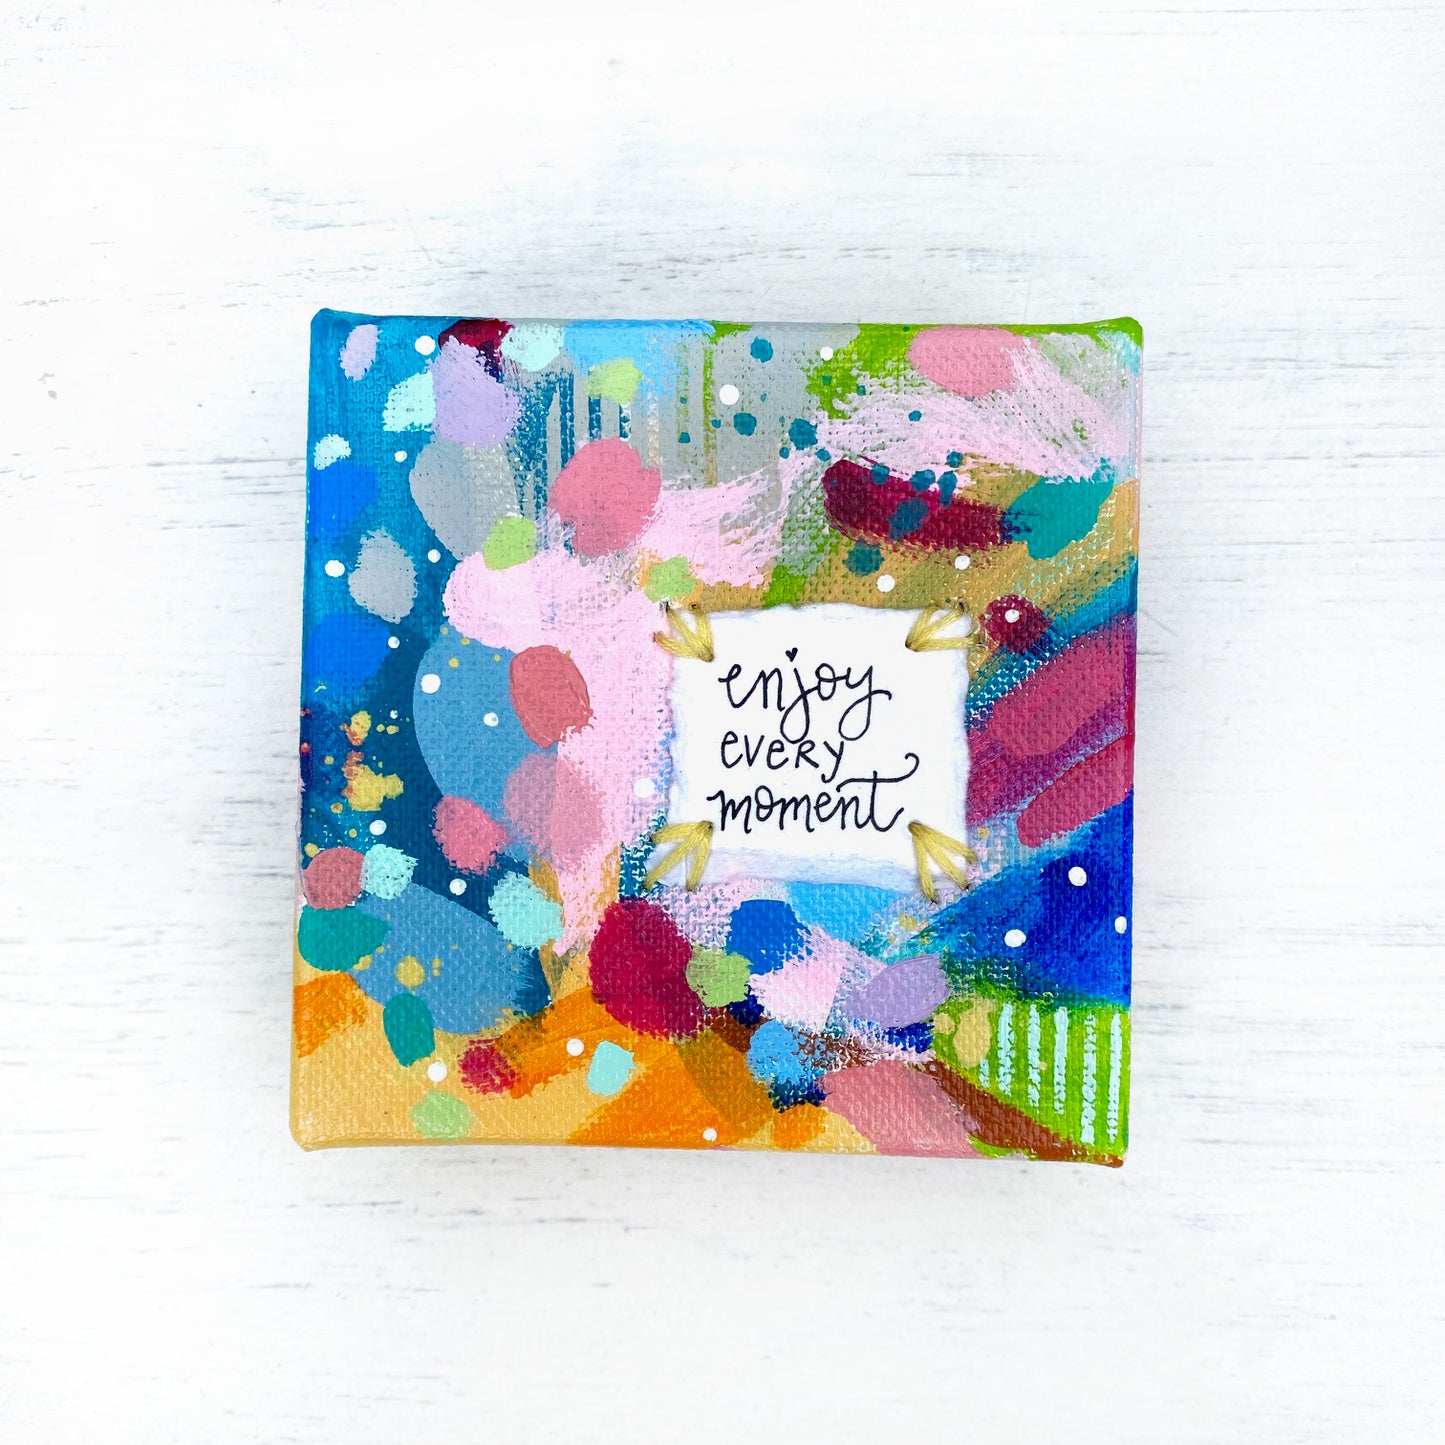 Enjoy Every Moment 4x4 inch original abstract canvas with embroidery thread accents - Bethany Joy Art